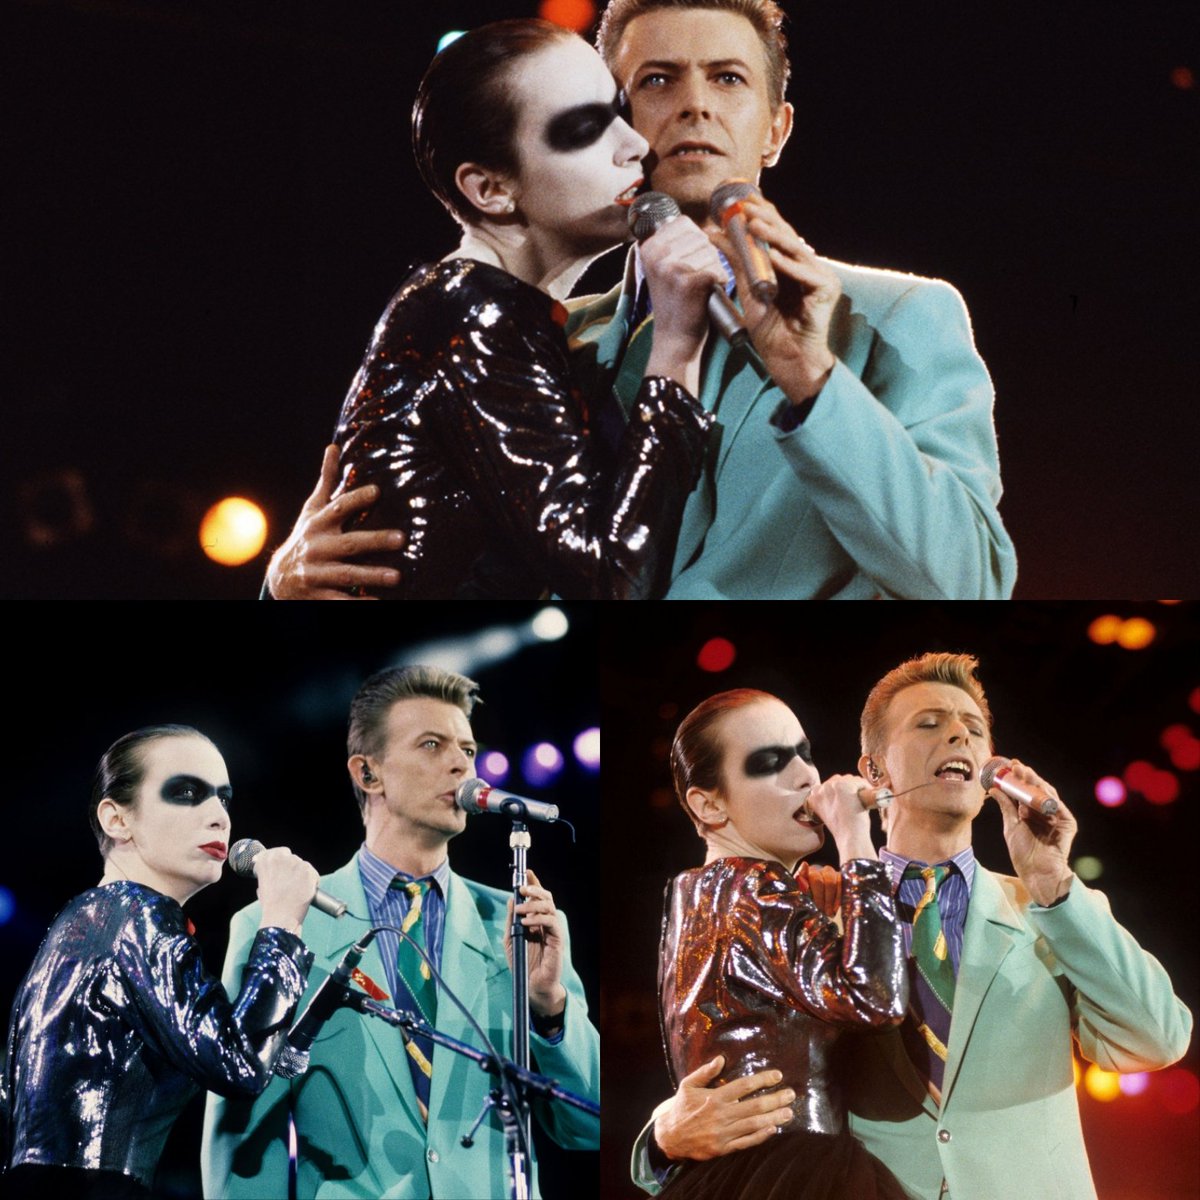 On this date in 1992 Annie Lennox and David Bowie performed 'Under Pressure' at the Freddie Mercury Tribute concert for Aids Awareness at Wembley Stadium.